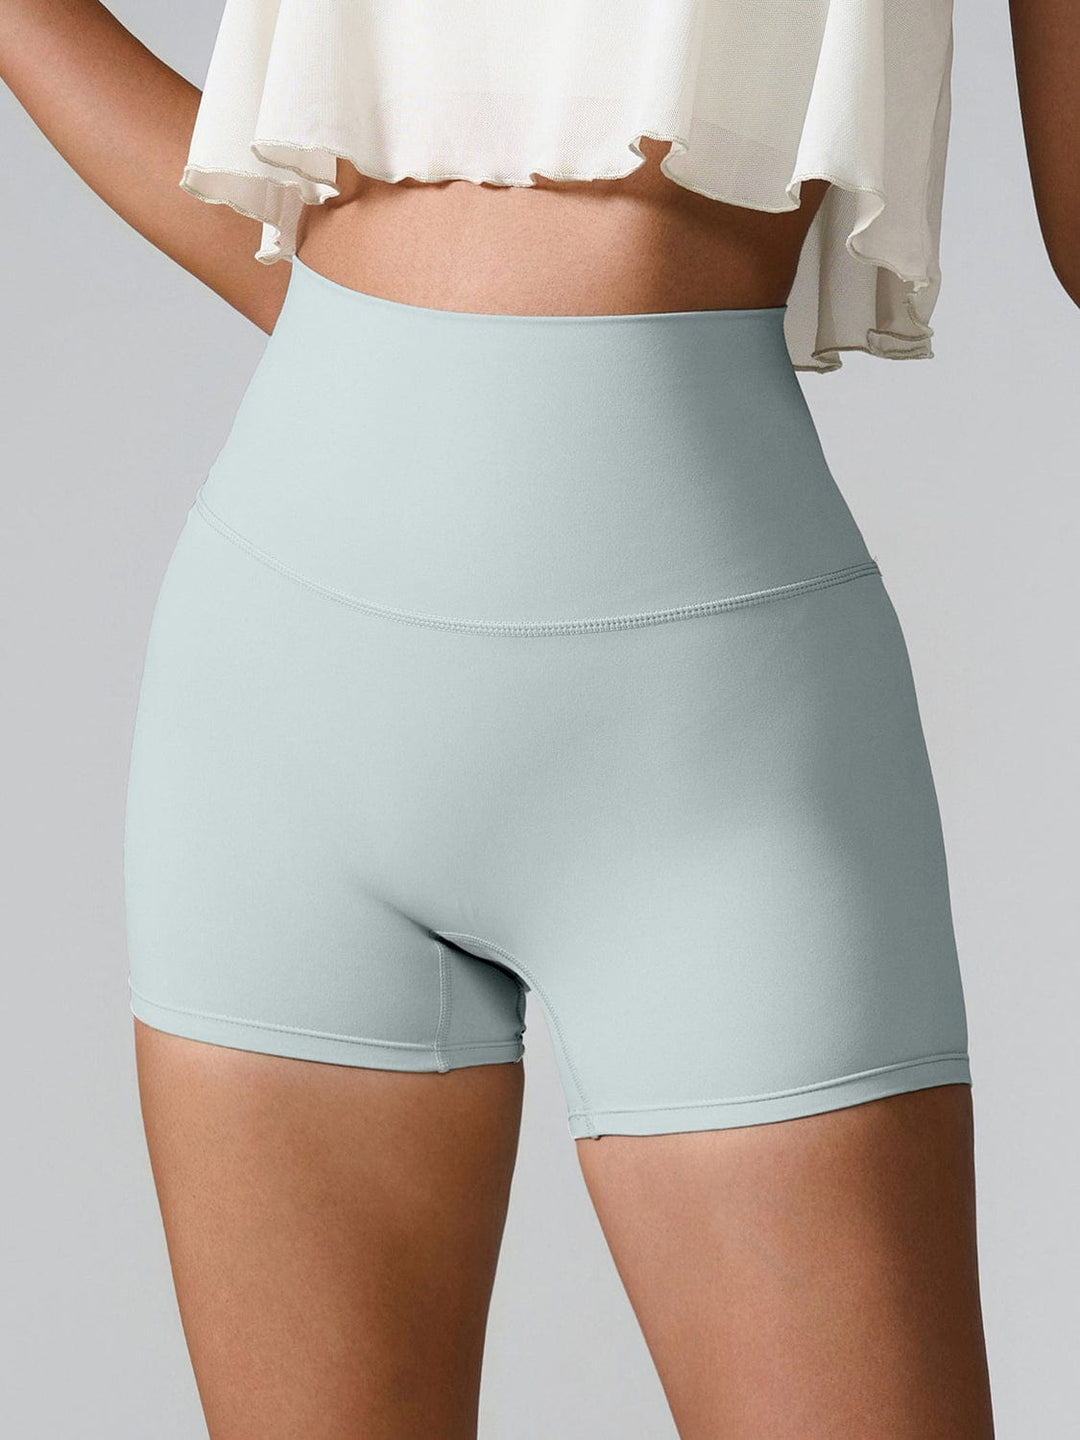 The802Gypsy Activewear/bottoms Light Green / S GYPSY-High Waist Active Shorts